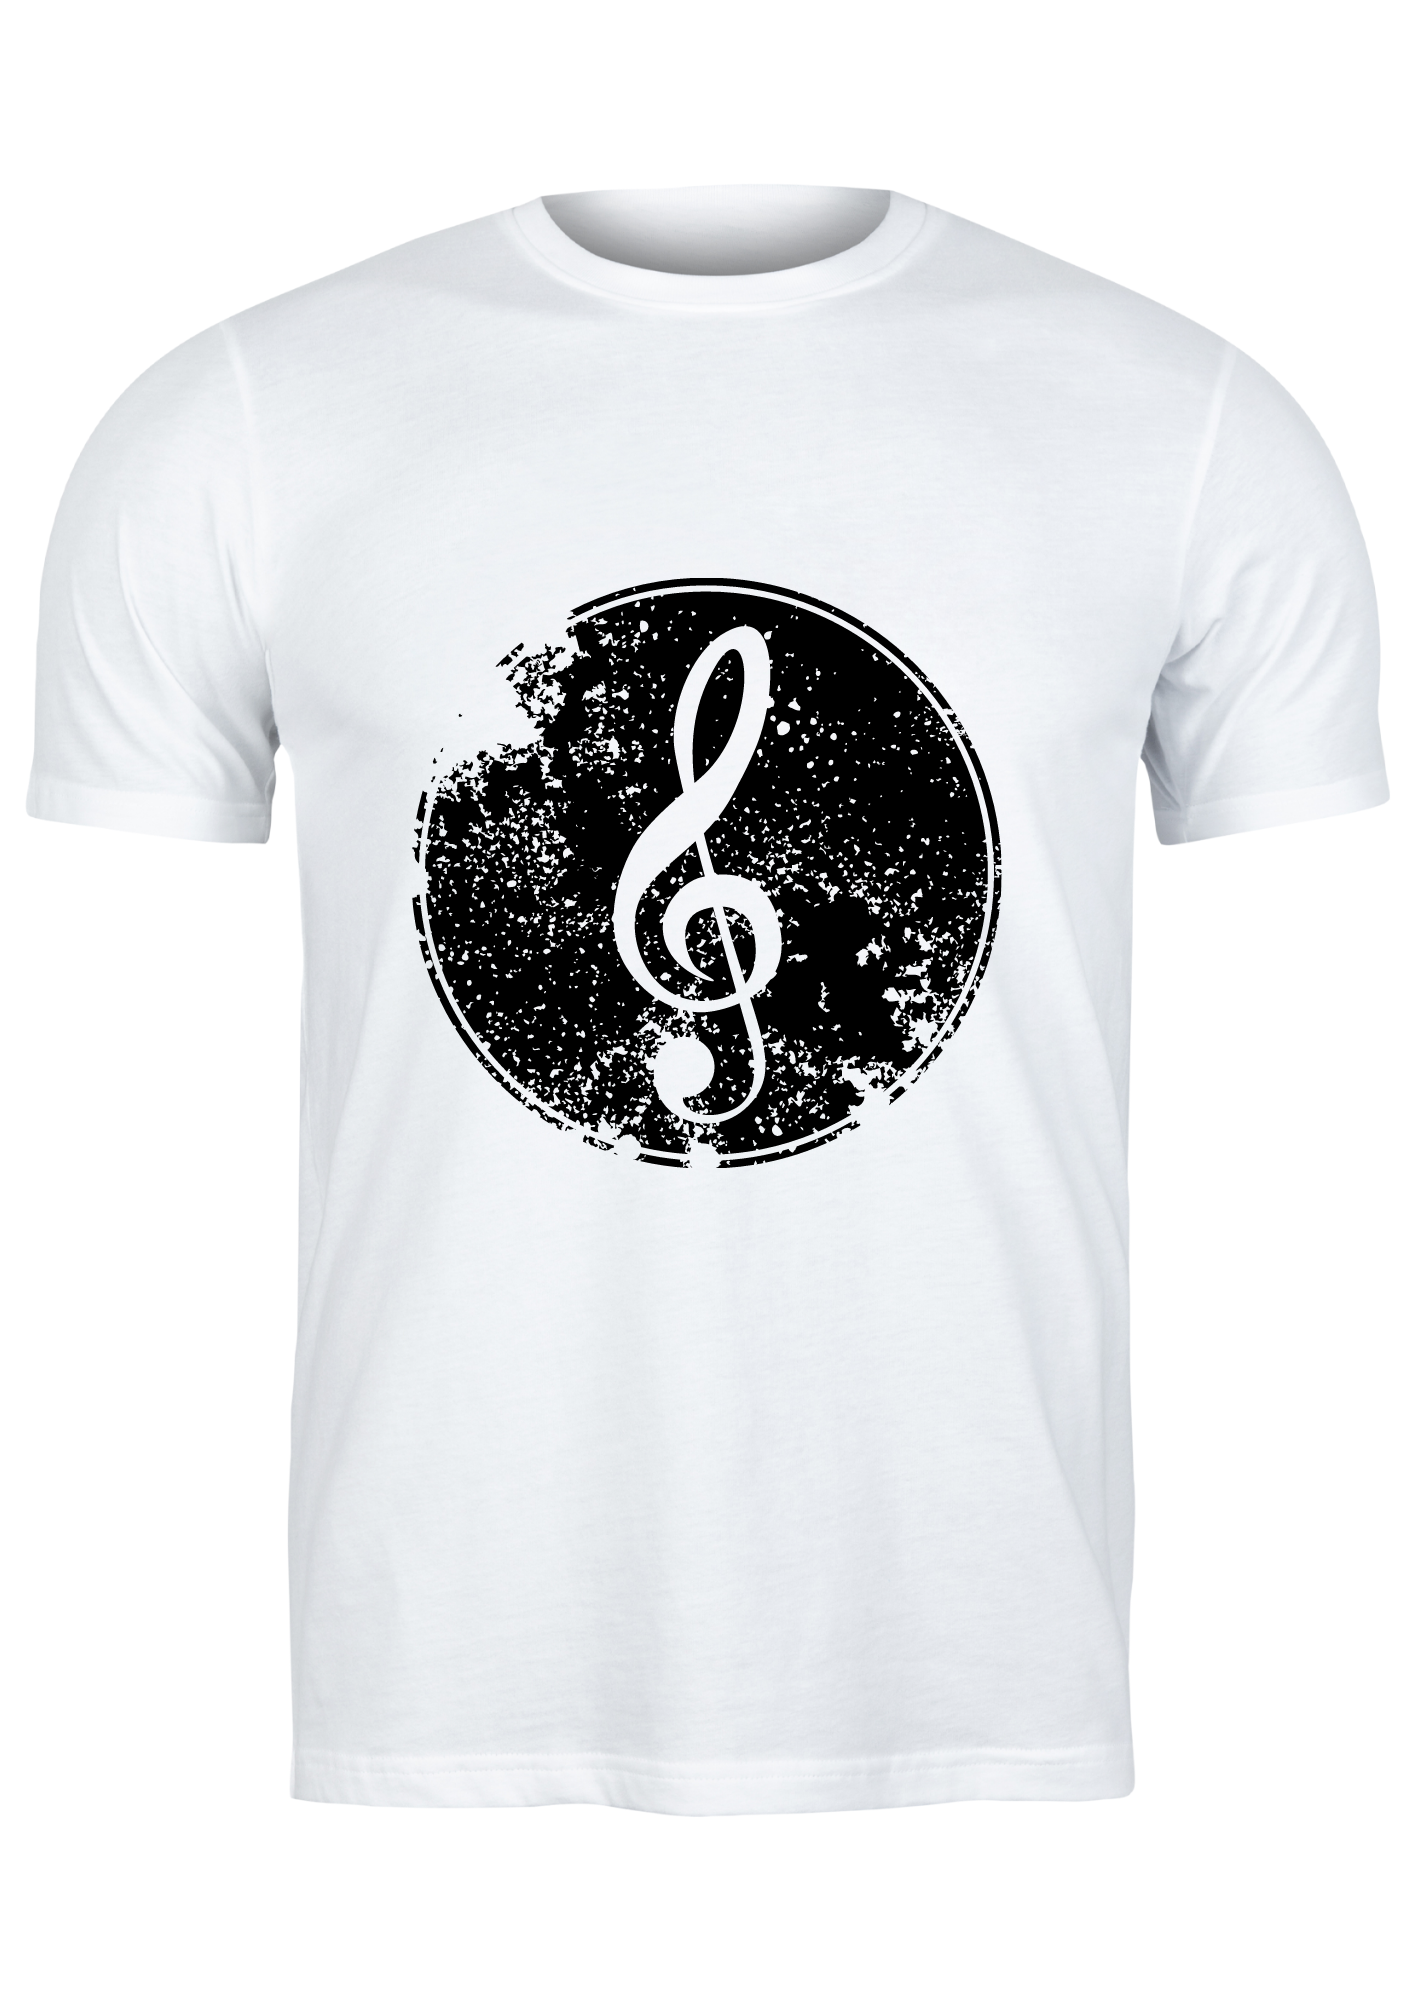 Unisex T Shirt Printed Distressed Music Note